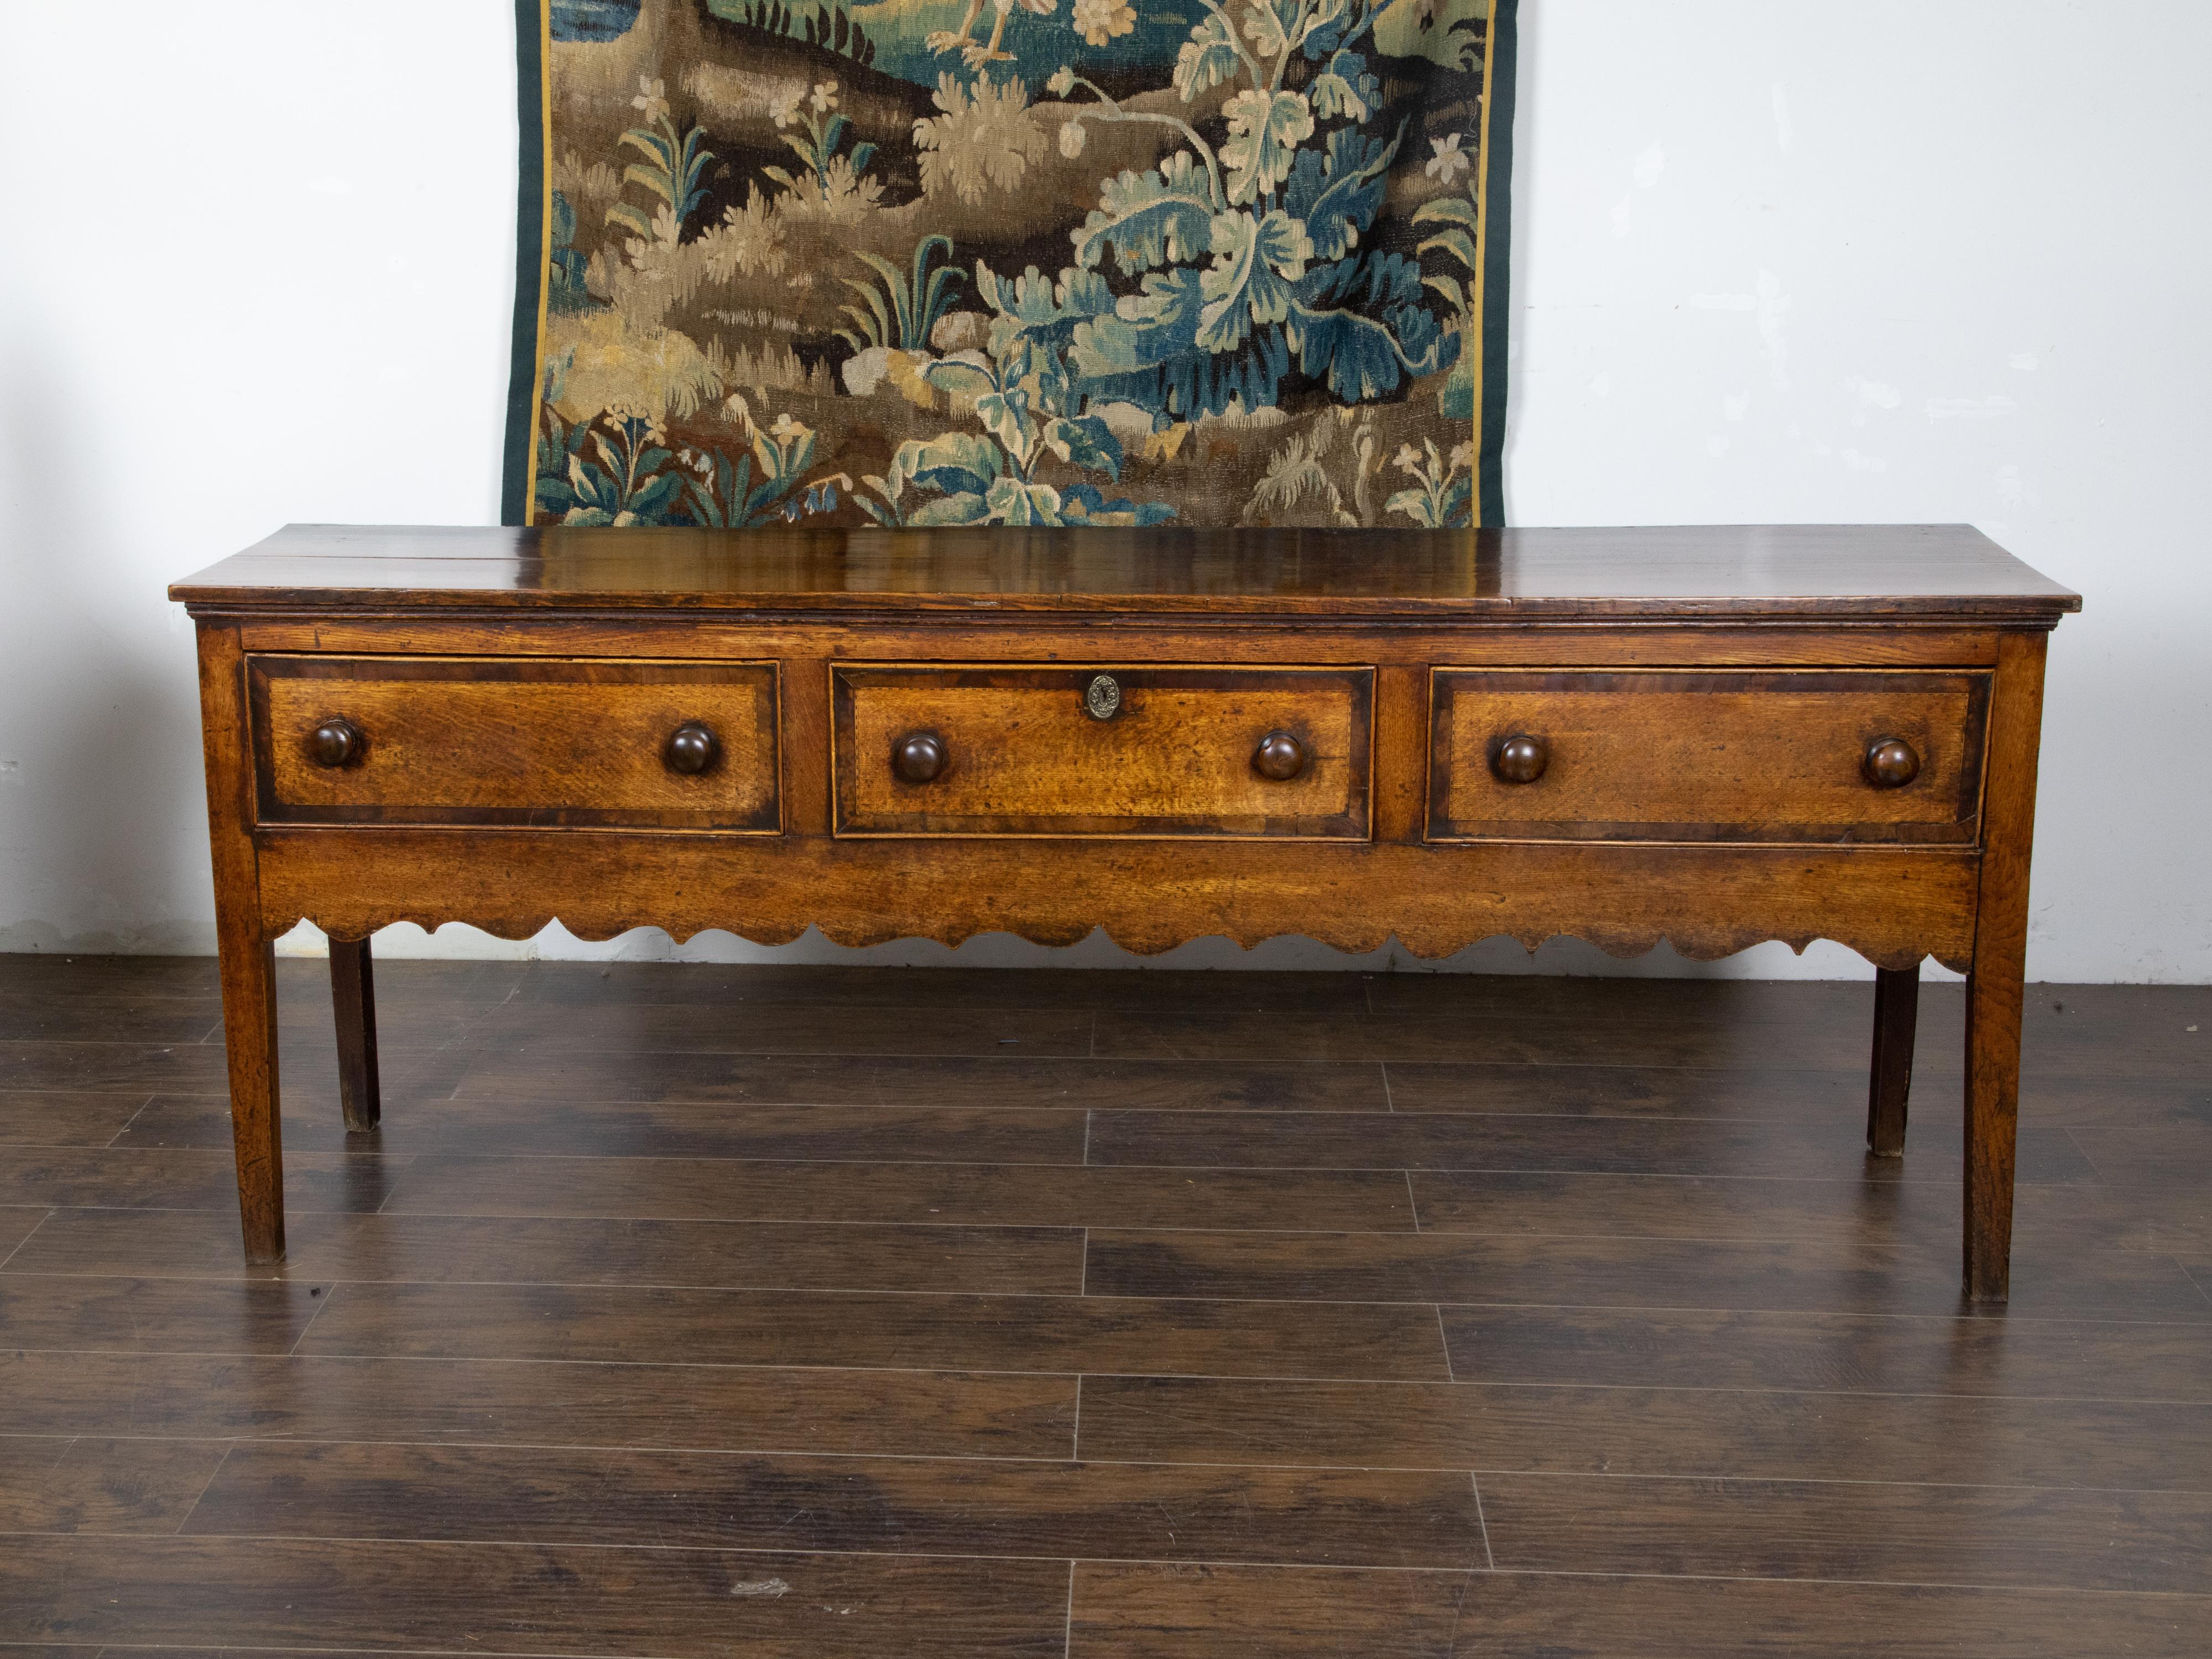 An English George III period oak dresser base from the early 19th century, with three drawers, inlay, scalloped apron and straight legs. Created in England during the reign of King George III in the early years of the 19th century, this oak dresser